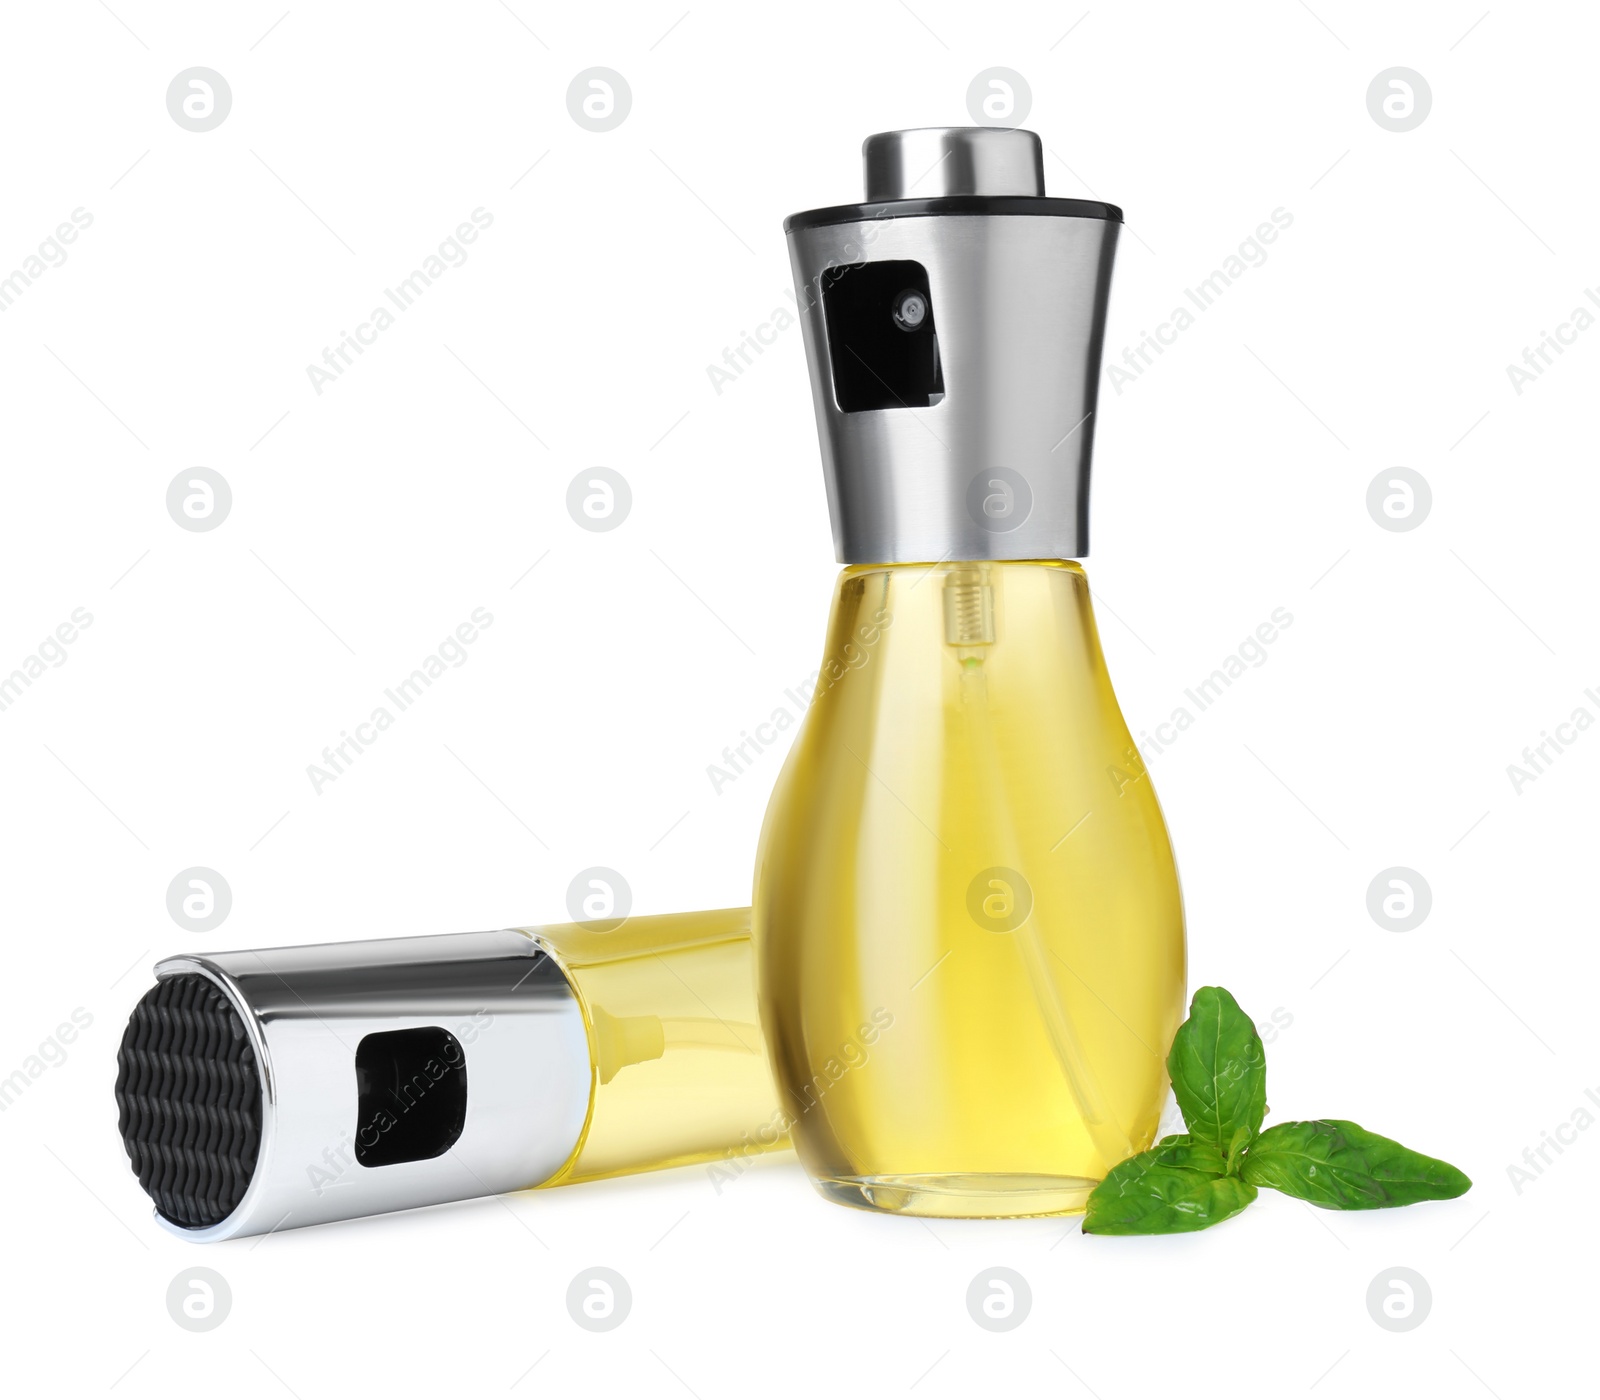 Photo of Spray bottles of cooking oil and basil leaves on white background